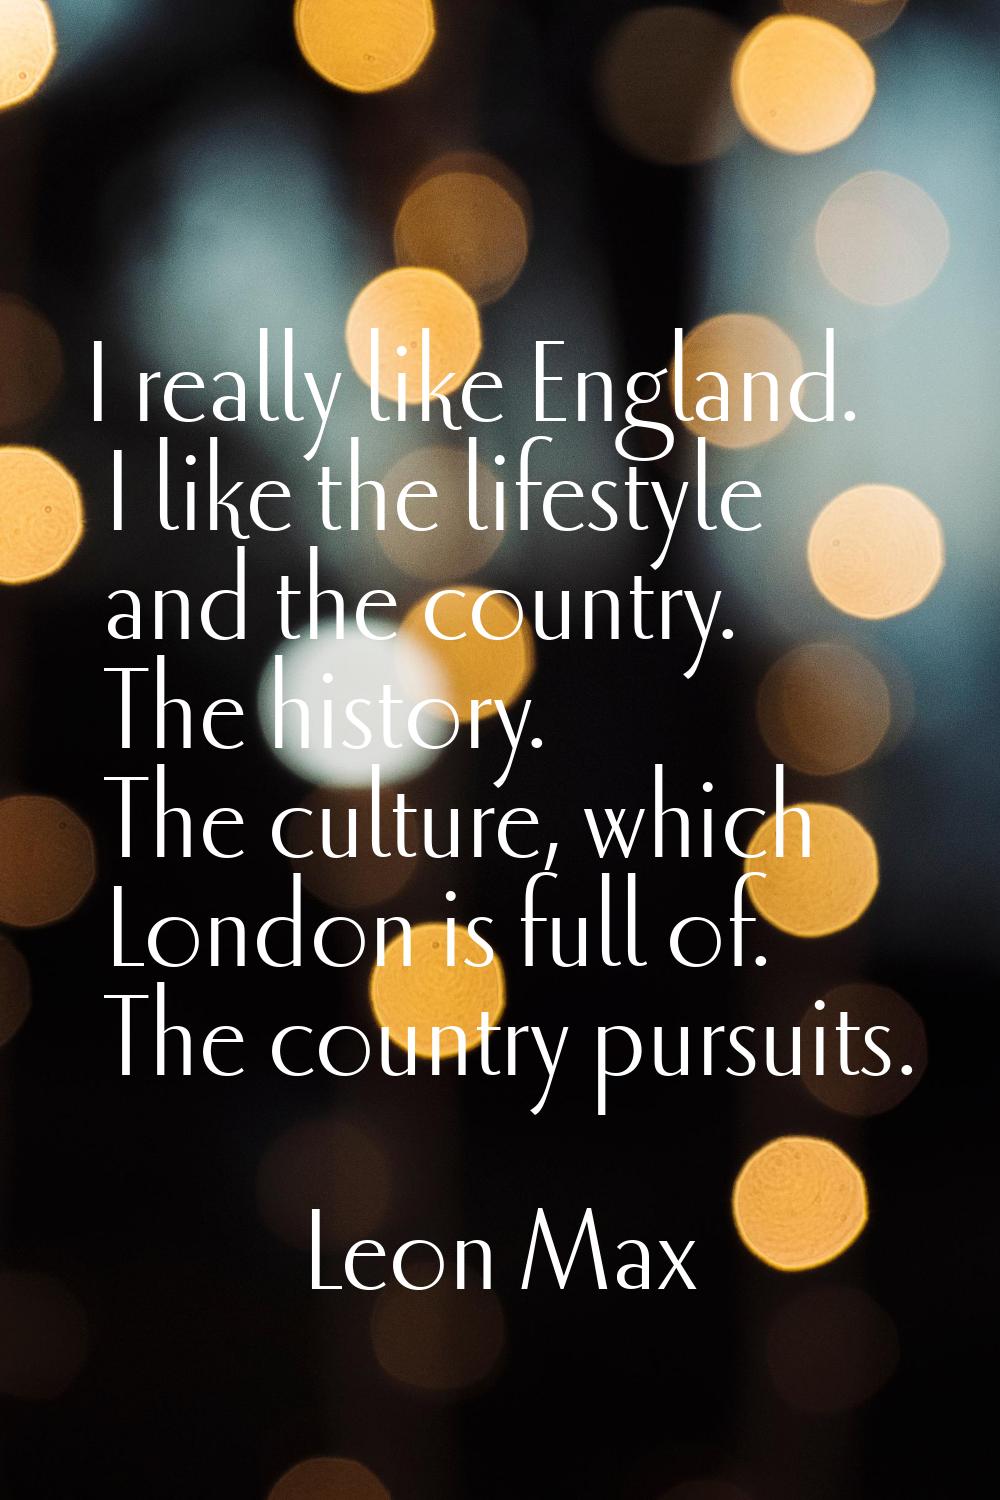 I really like England. I like the lifestyle and the country. The history. The culture, which London